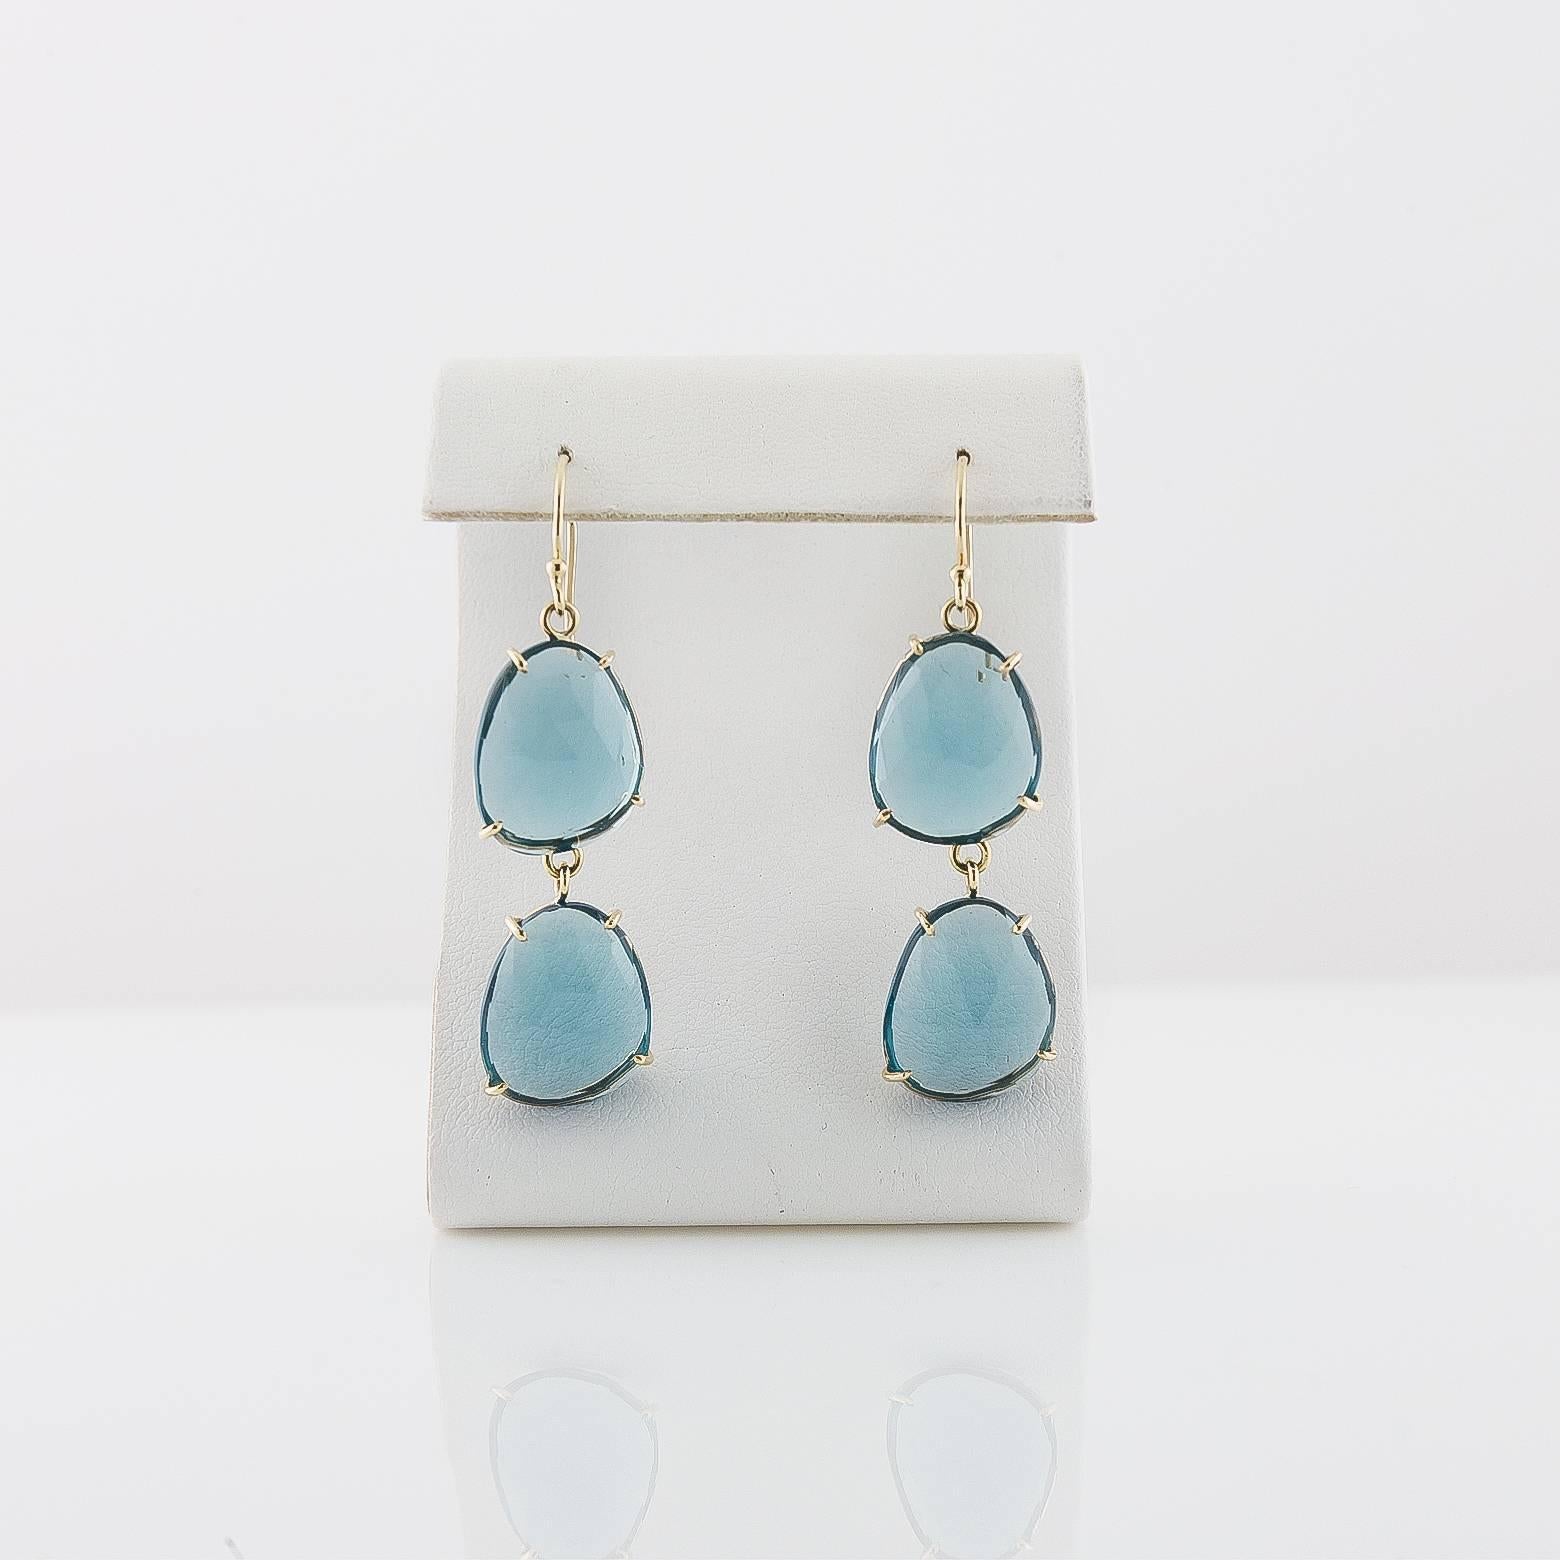 These stunning ocean and sky blue topaz earrings are dazzling. Delicately set in 14k and elegant. They can easily be dressed up or down to create any look that you like. 